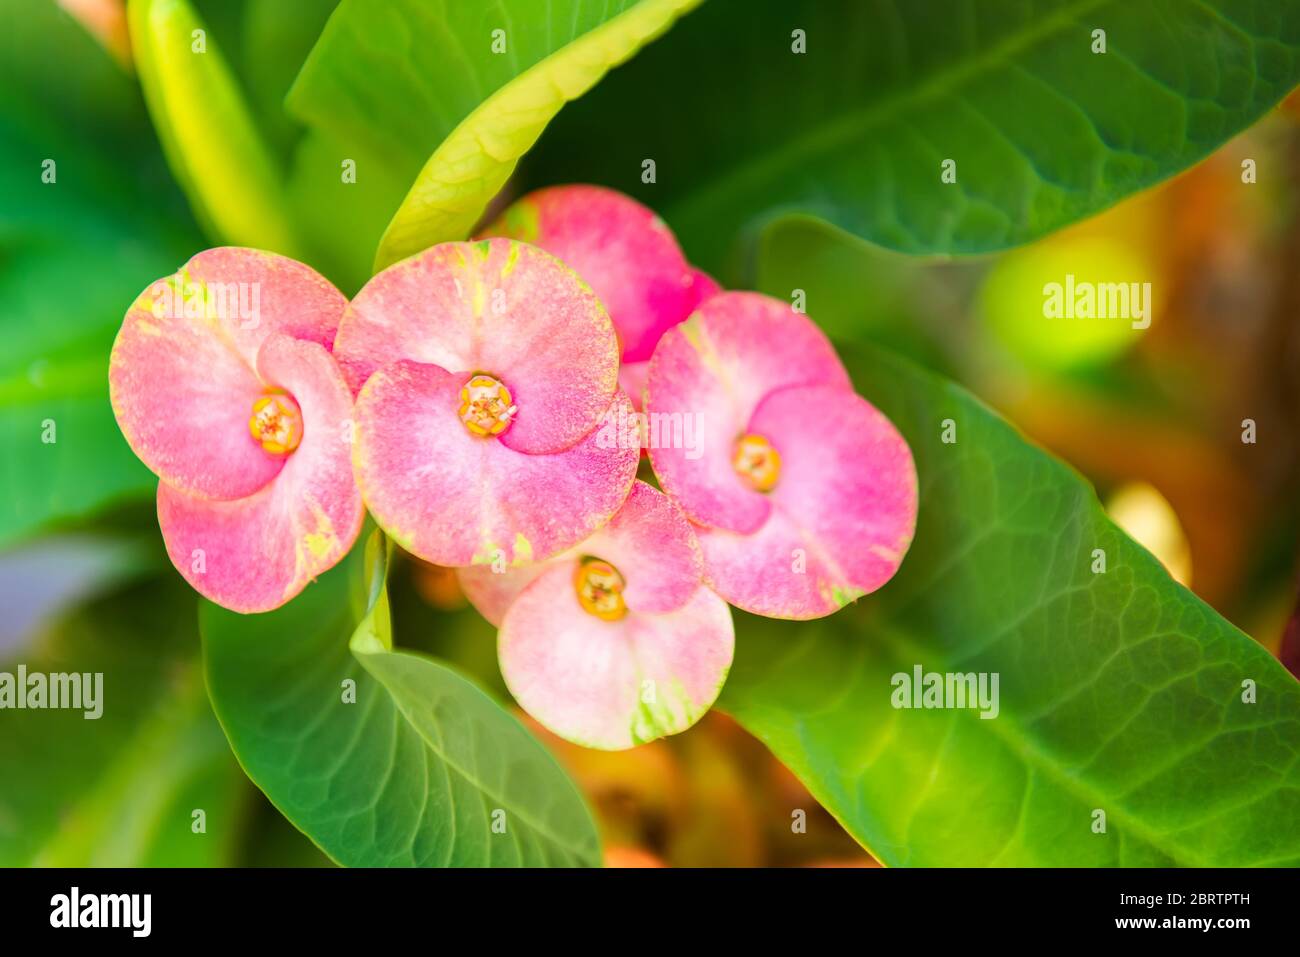 Crown of thorns. Christ Thorn flower blooming with green leaves background in flowerpot at the park. Stock Photo